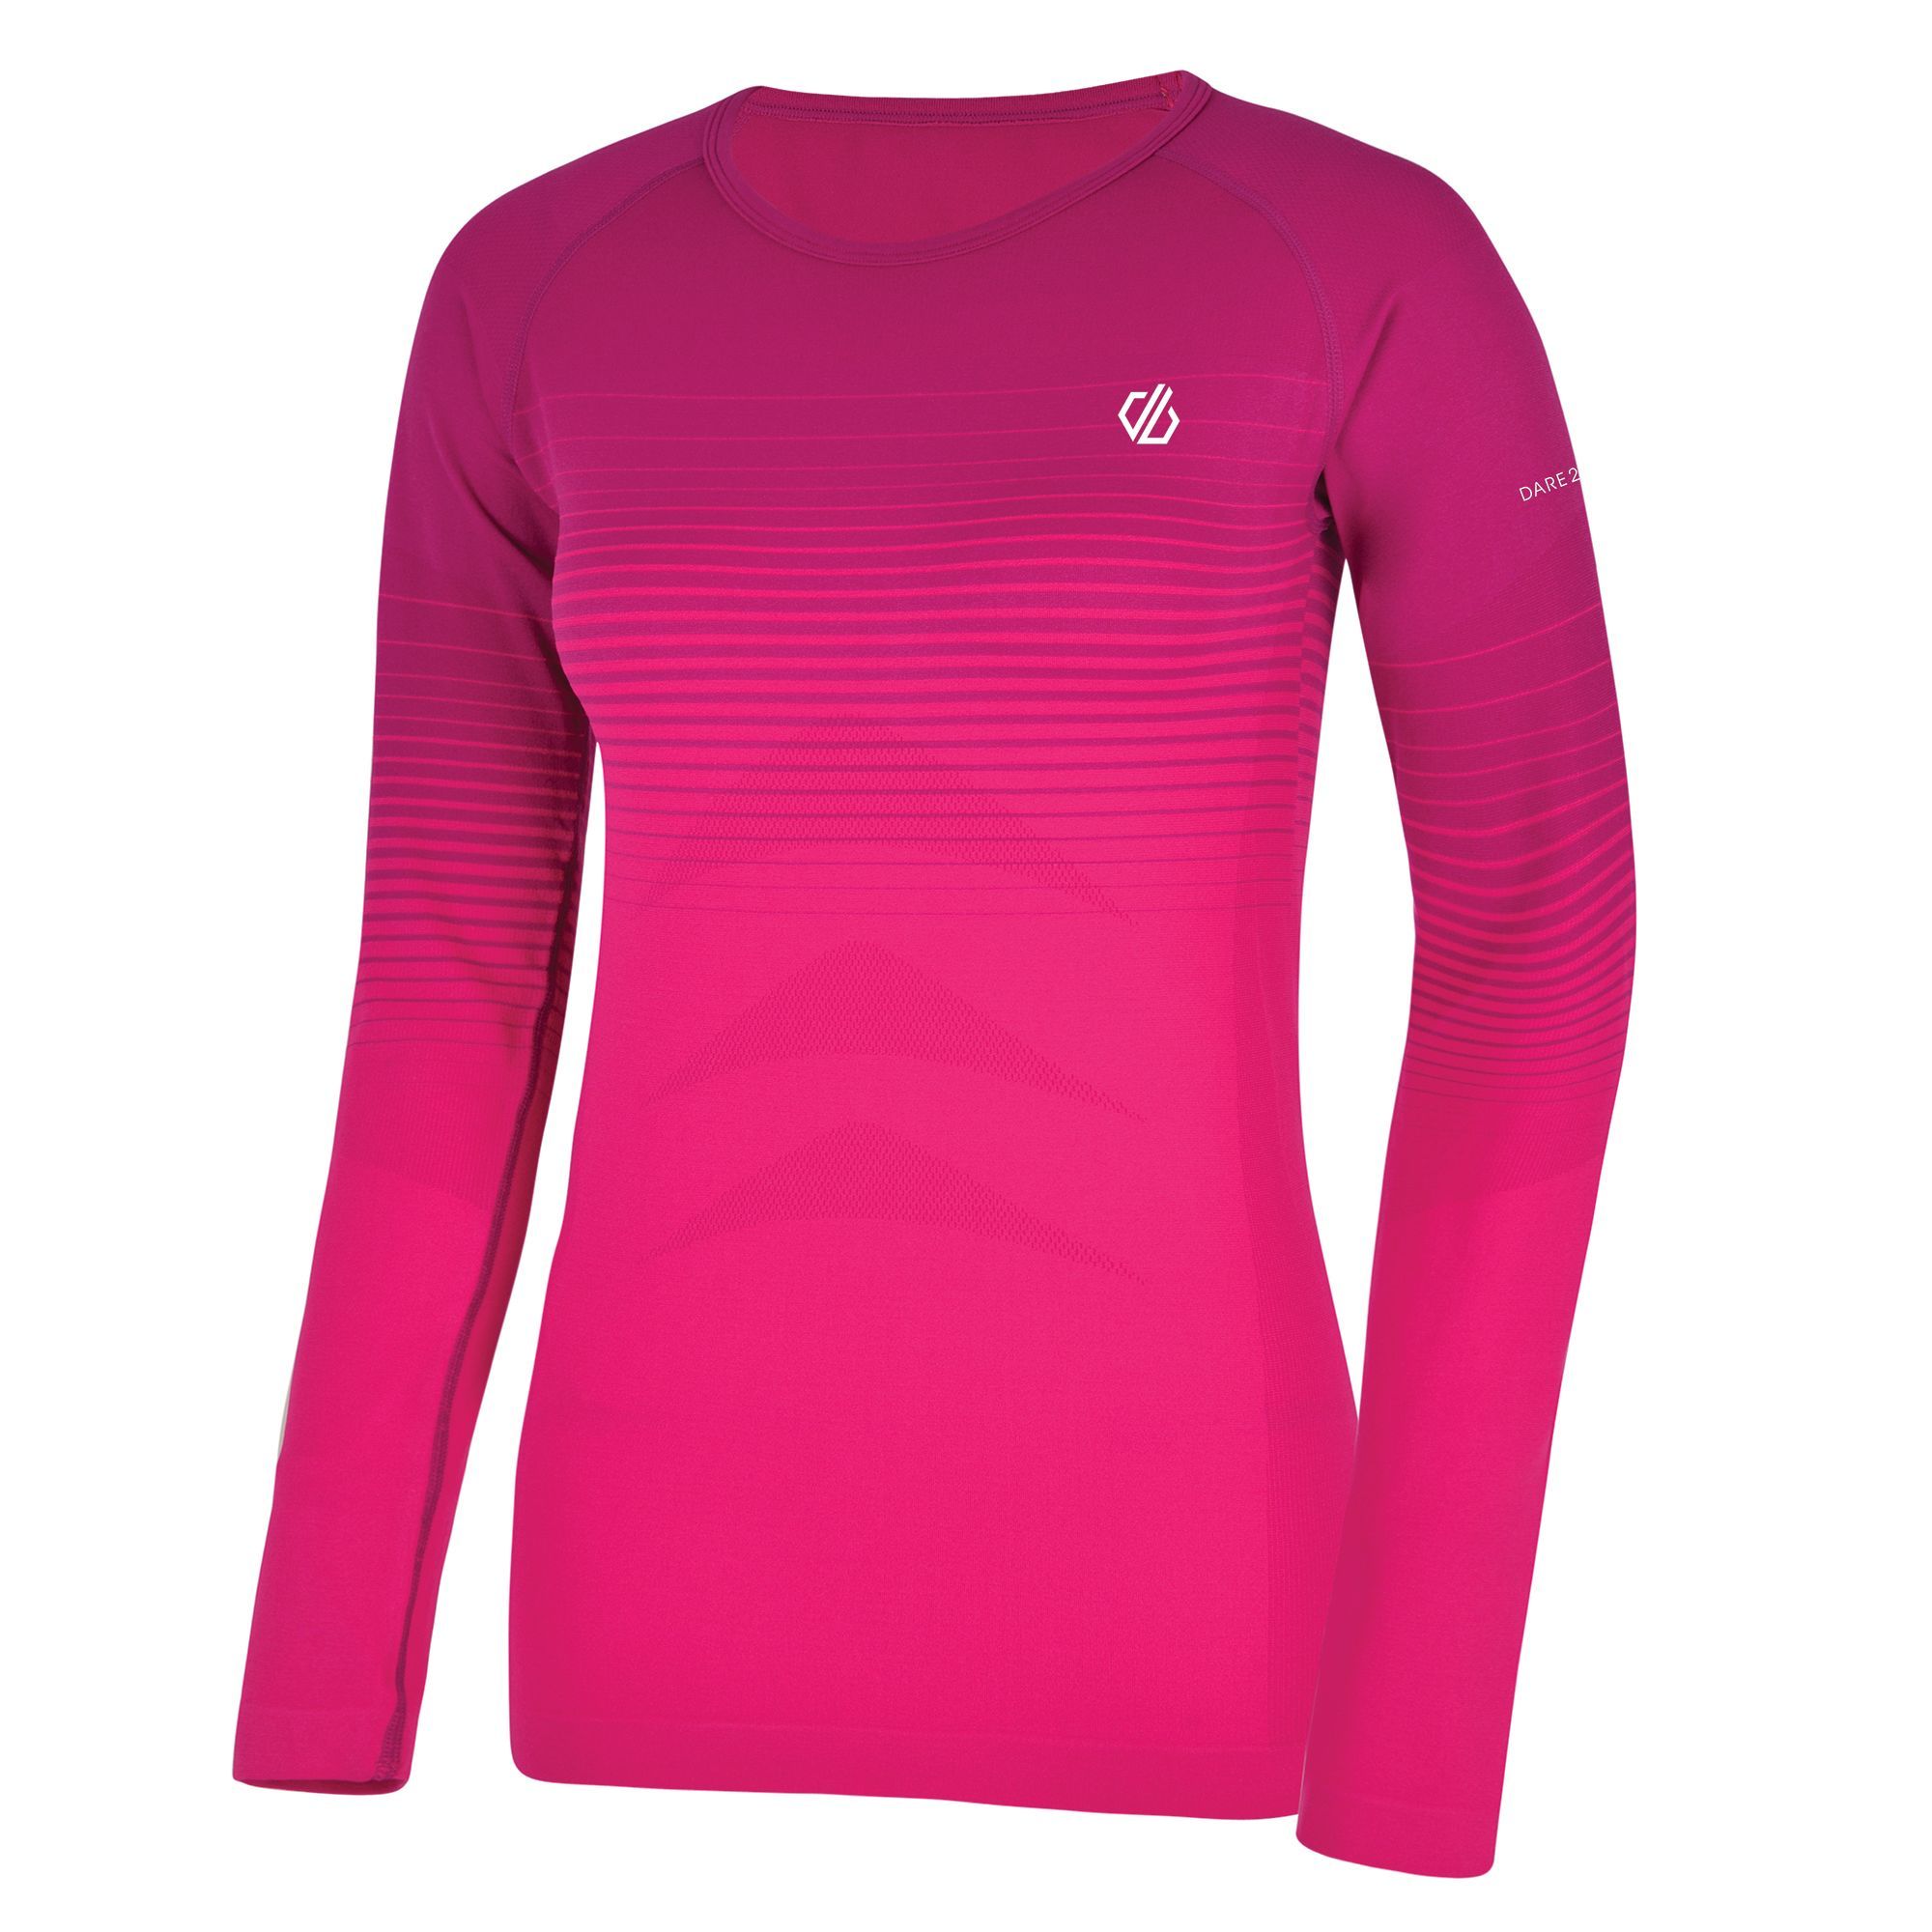 Elastane (5%), Polyester (30%), Polyamide (65%). Performance base layer collection. SeamSmart Technology. Q-Wic Seamless knitted fabric. Ergonomic body map fit. Fast wicking and quick drying properties.  odour control treatment. Dare 2B Womens Sizing (chest approx): 6 (30in/76cm), 8 (32in/81cm), 10 (34in/86cm), 12 (36in/92cm), 14 (38in/97cm), 16 (40in/102cm), 18 (42in/107cm), 20 (44in/112cm), 22 (46in/117cm), 24 (48in/122cm).